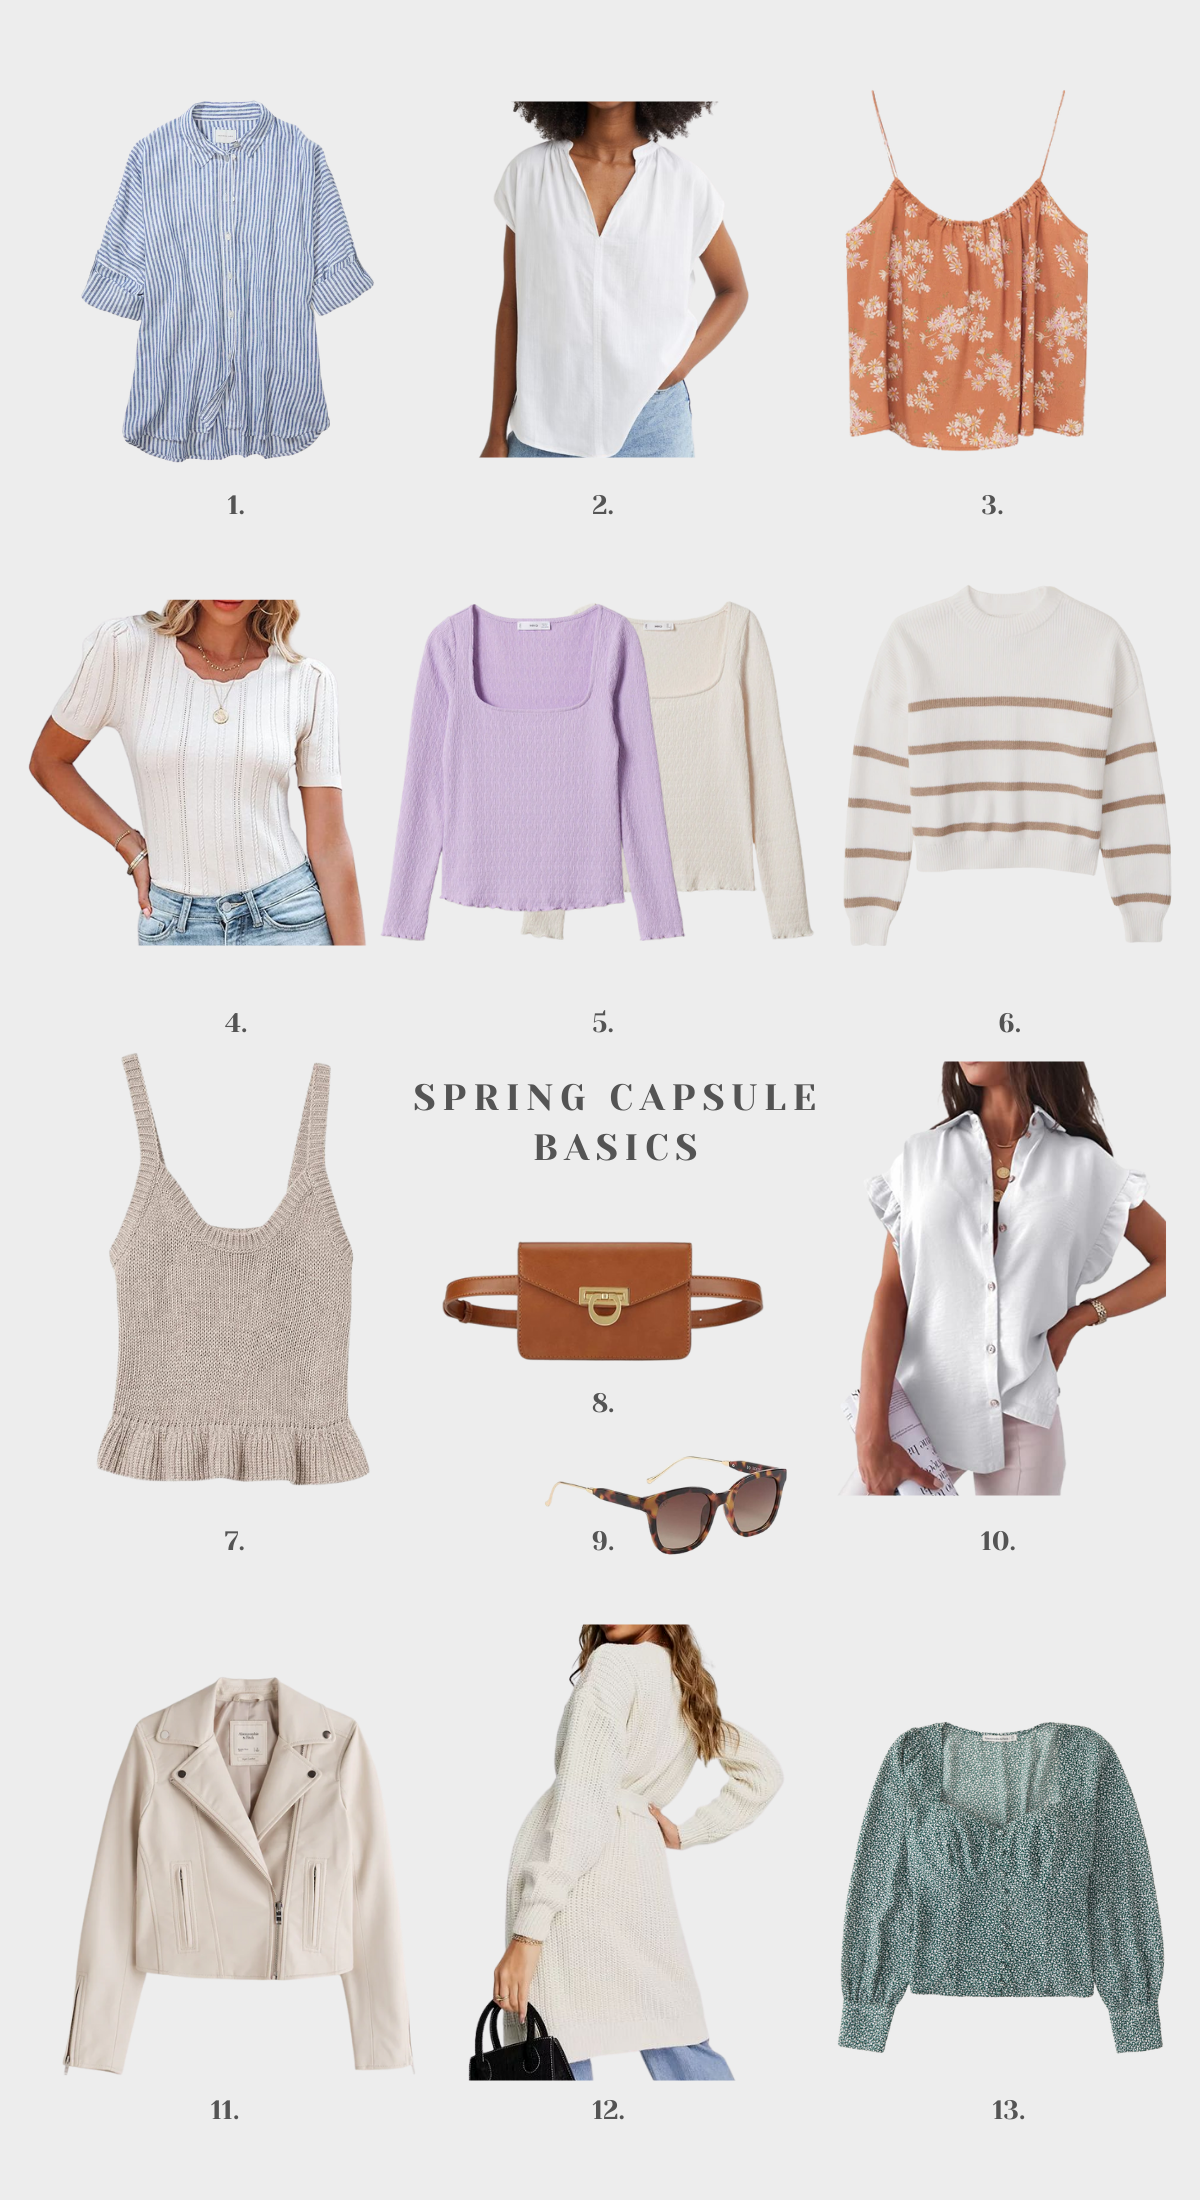 ZARA HAUL TRY ON SPRING 2022 COLLECTION / HOW TO BUILD A CAPSULE WARDROBE 